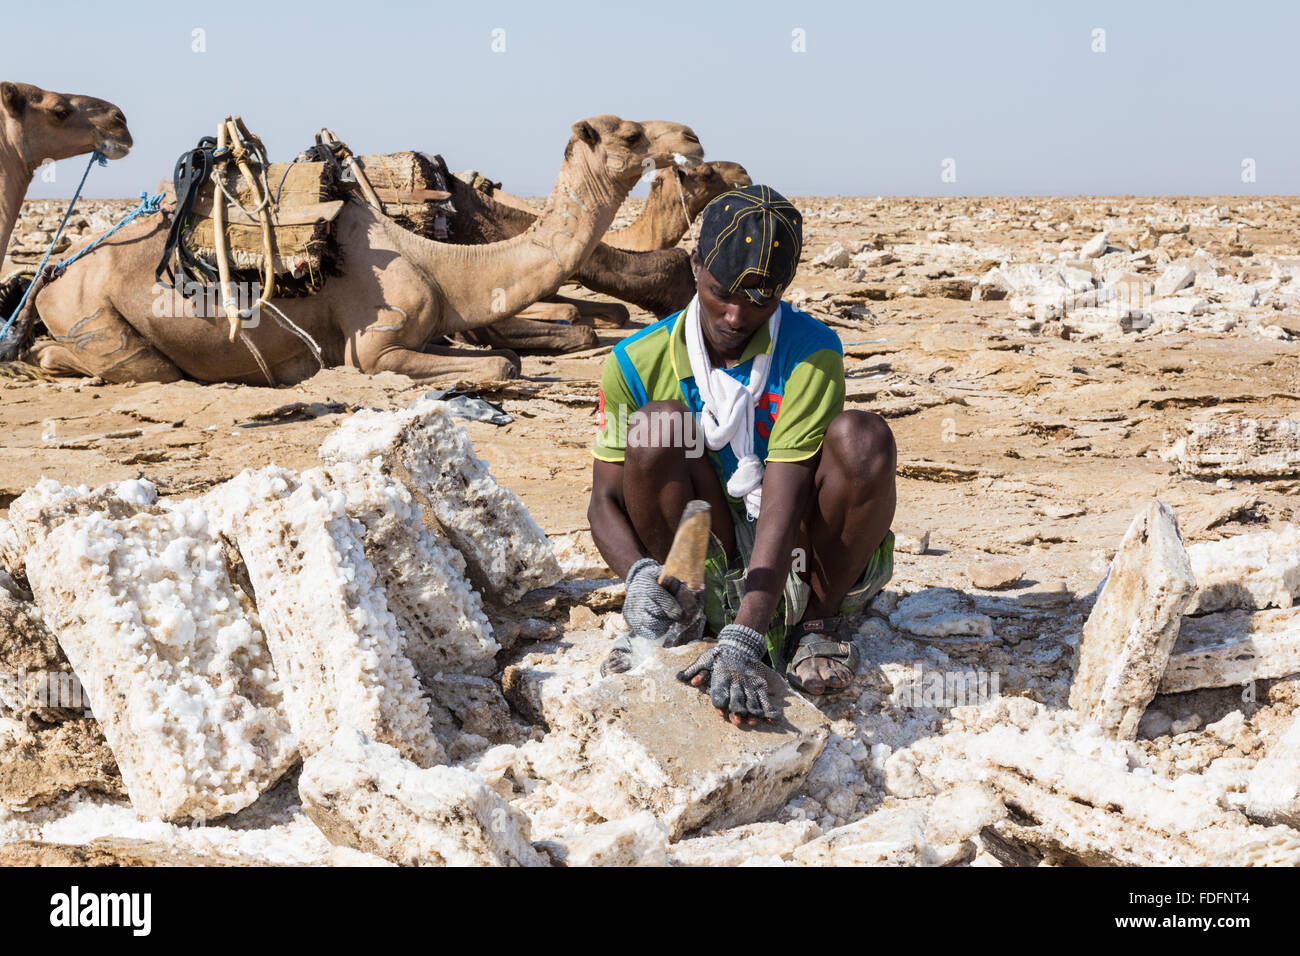 A man uses a simple hand-axe to shape blocks of salt near Dallol in Ethiopia. These blocks are loaded onto camels for transport to the nearest town. Once the camels travelled all the way to the highlands from here. Stock Photo